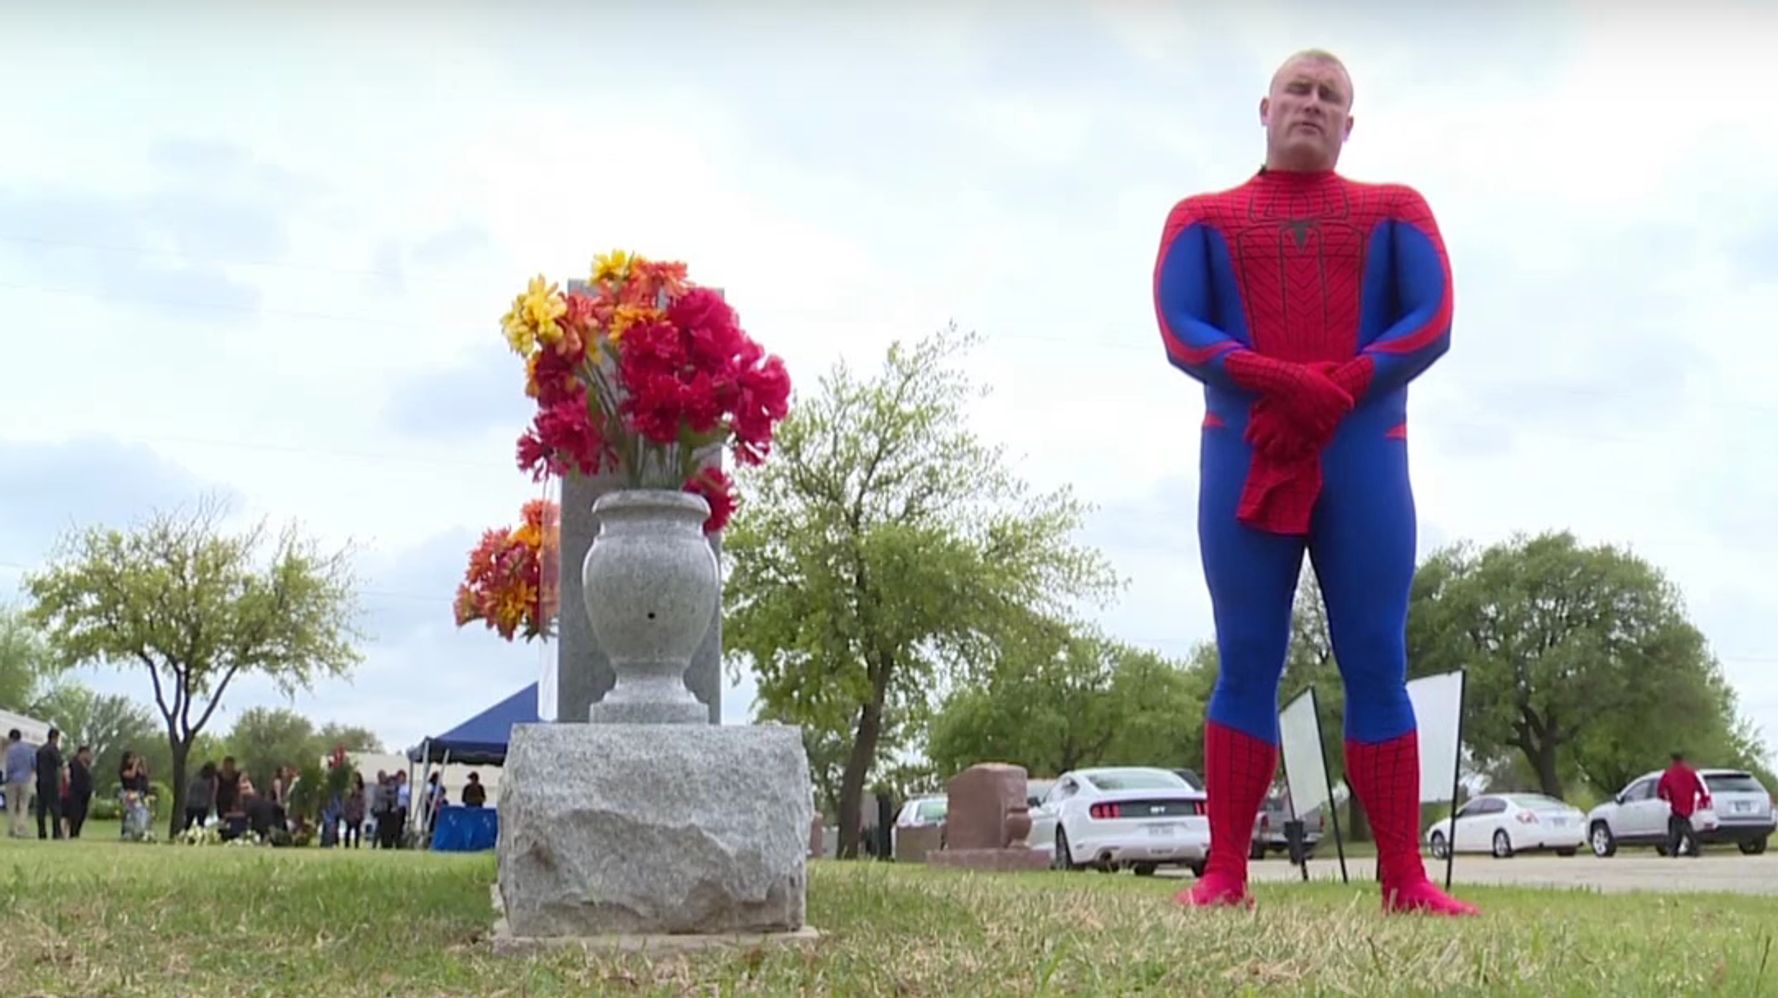 Police Officer Attends Child's Funeral Dressed As Spider-Man | HuffPost  Voices